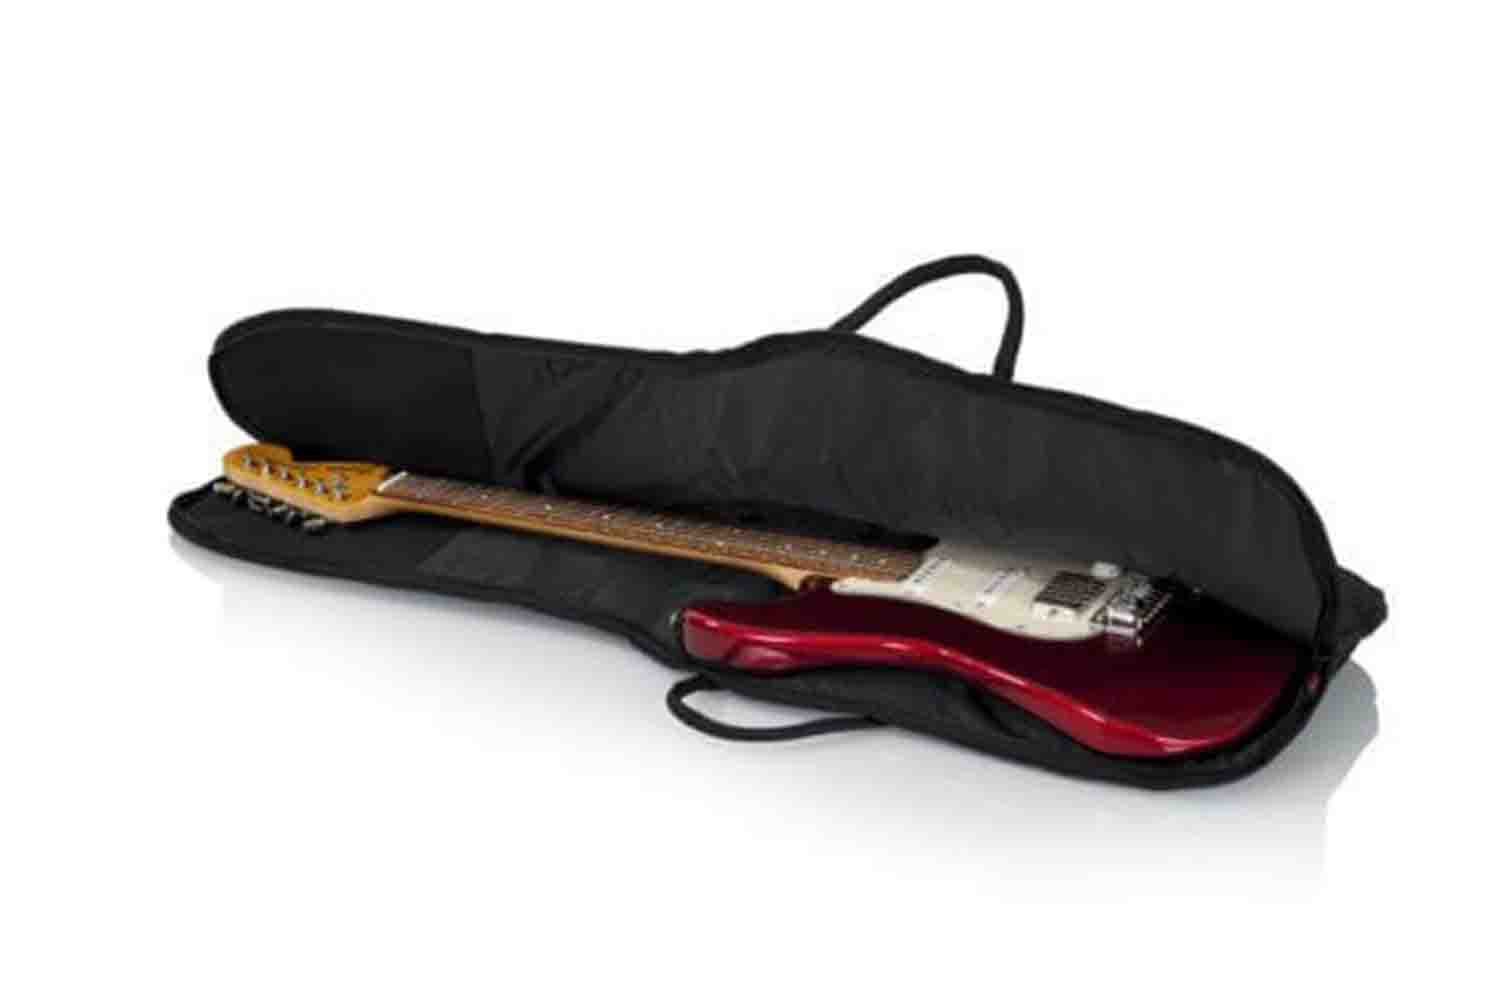 Gator GBE-ELECT Economy Gig Bag for Electric Guitars by Gator Cases